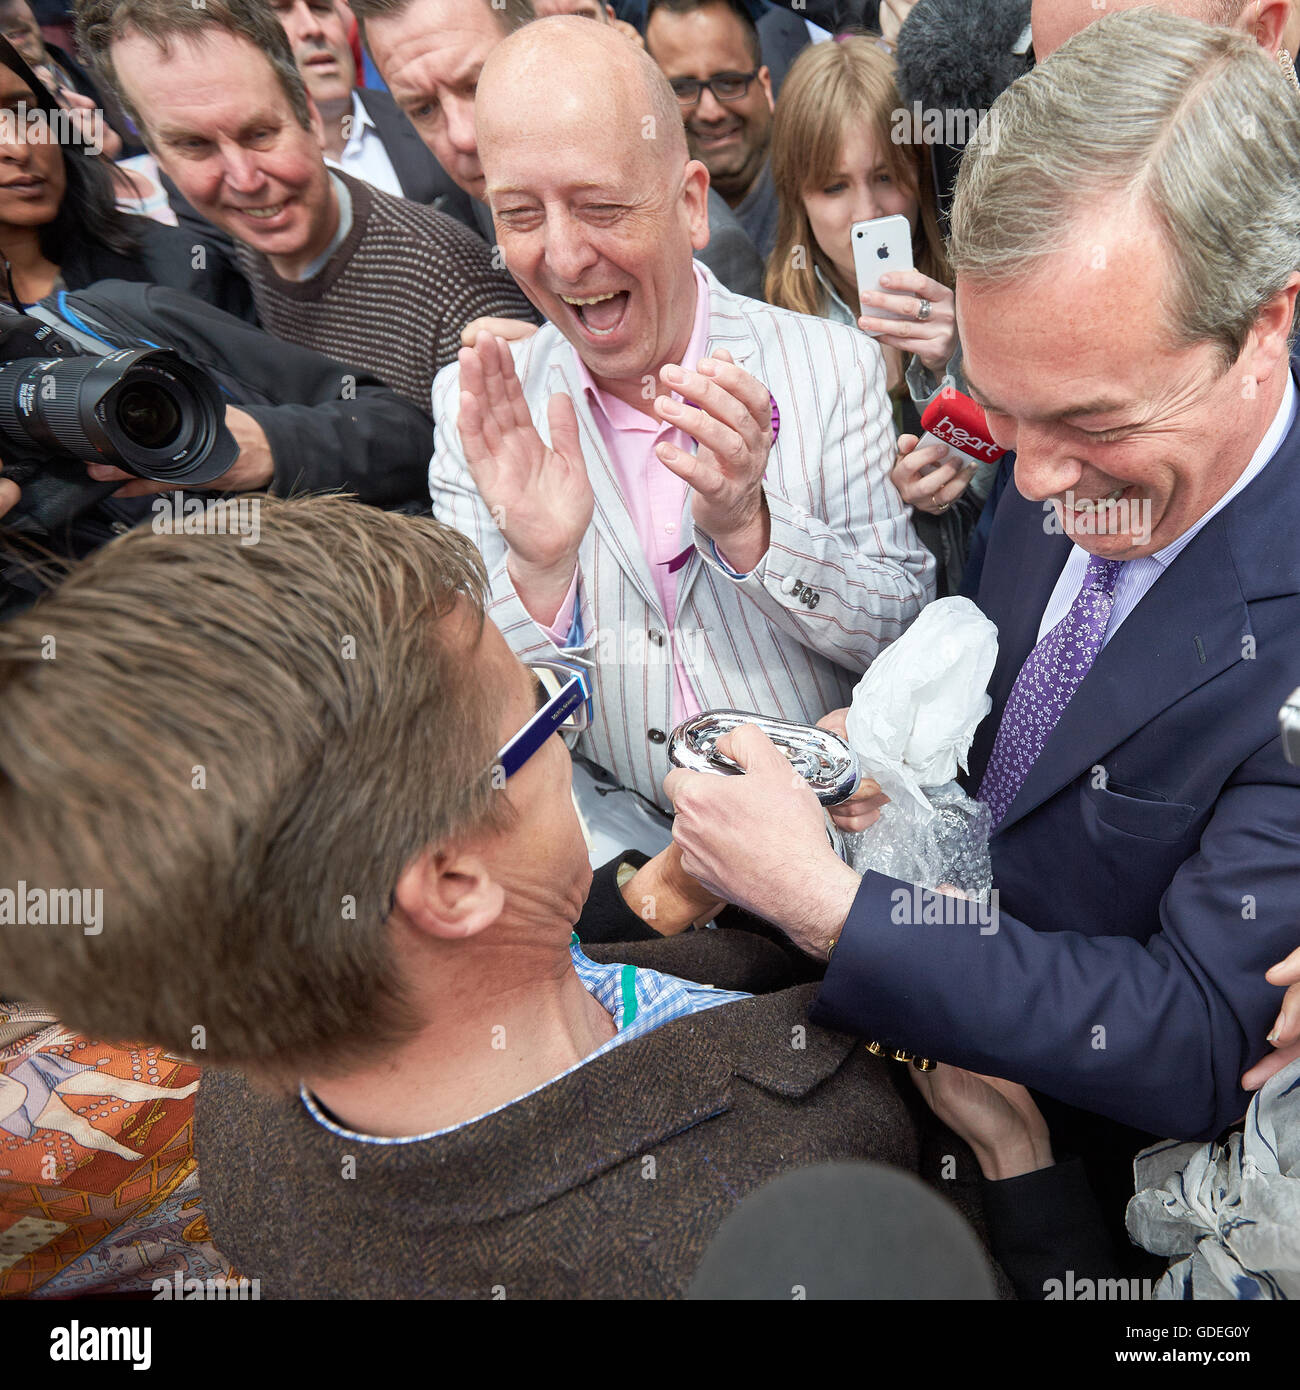 Nigel Farage (R), UKIP party leader receives a gift from a supporter during a campaign visit to Aylesbury Stock Photo